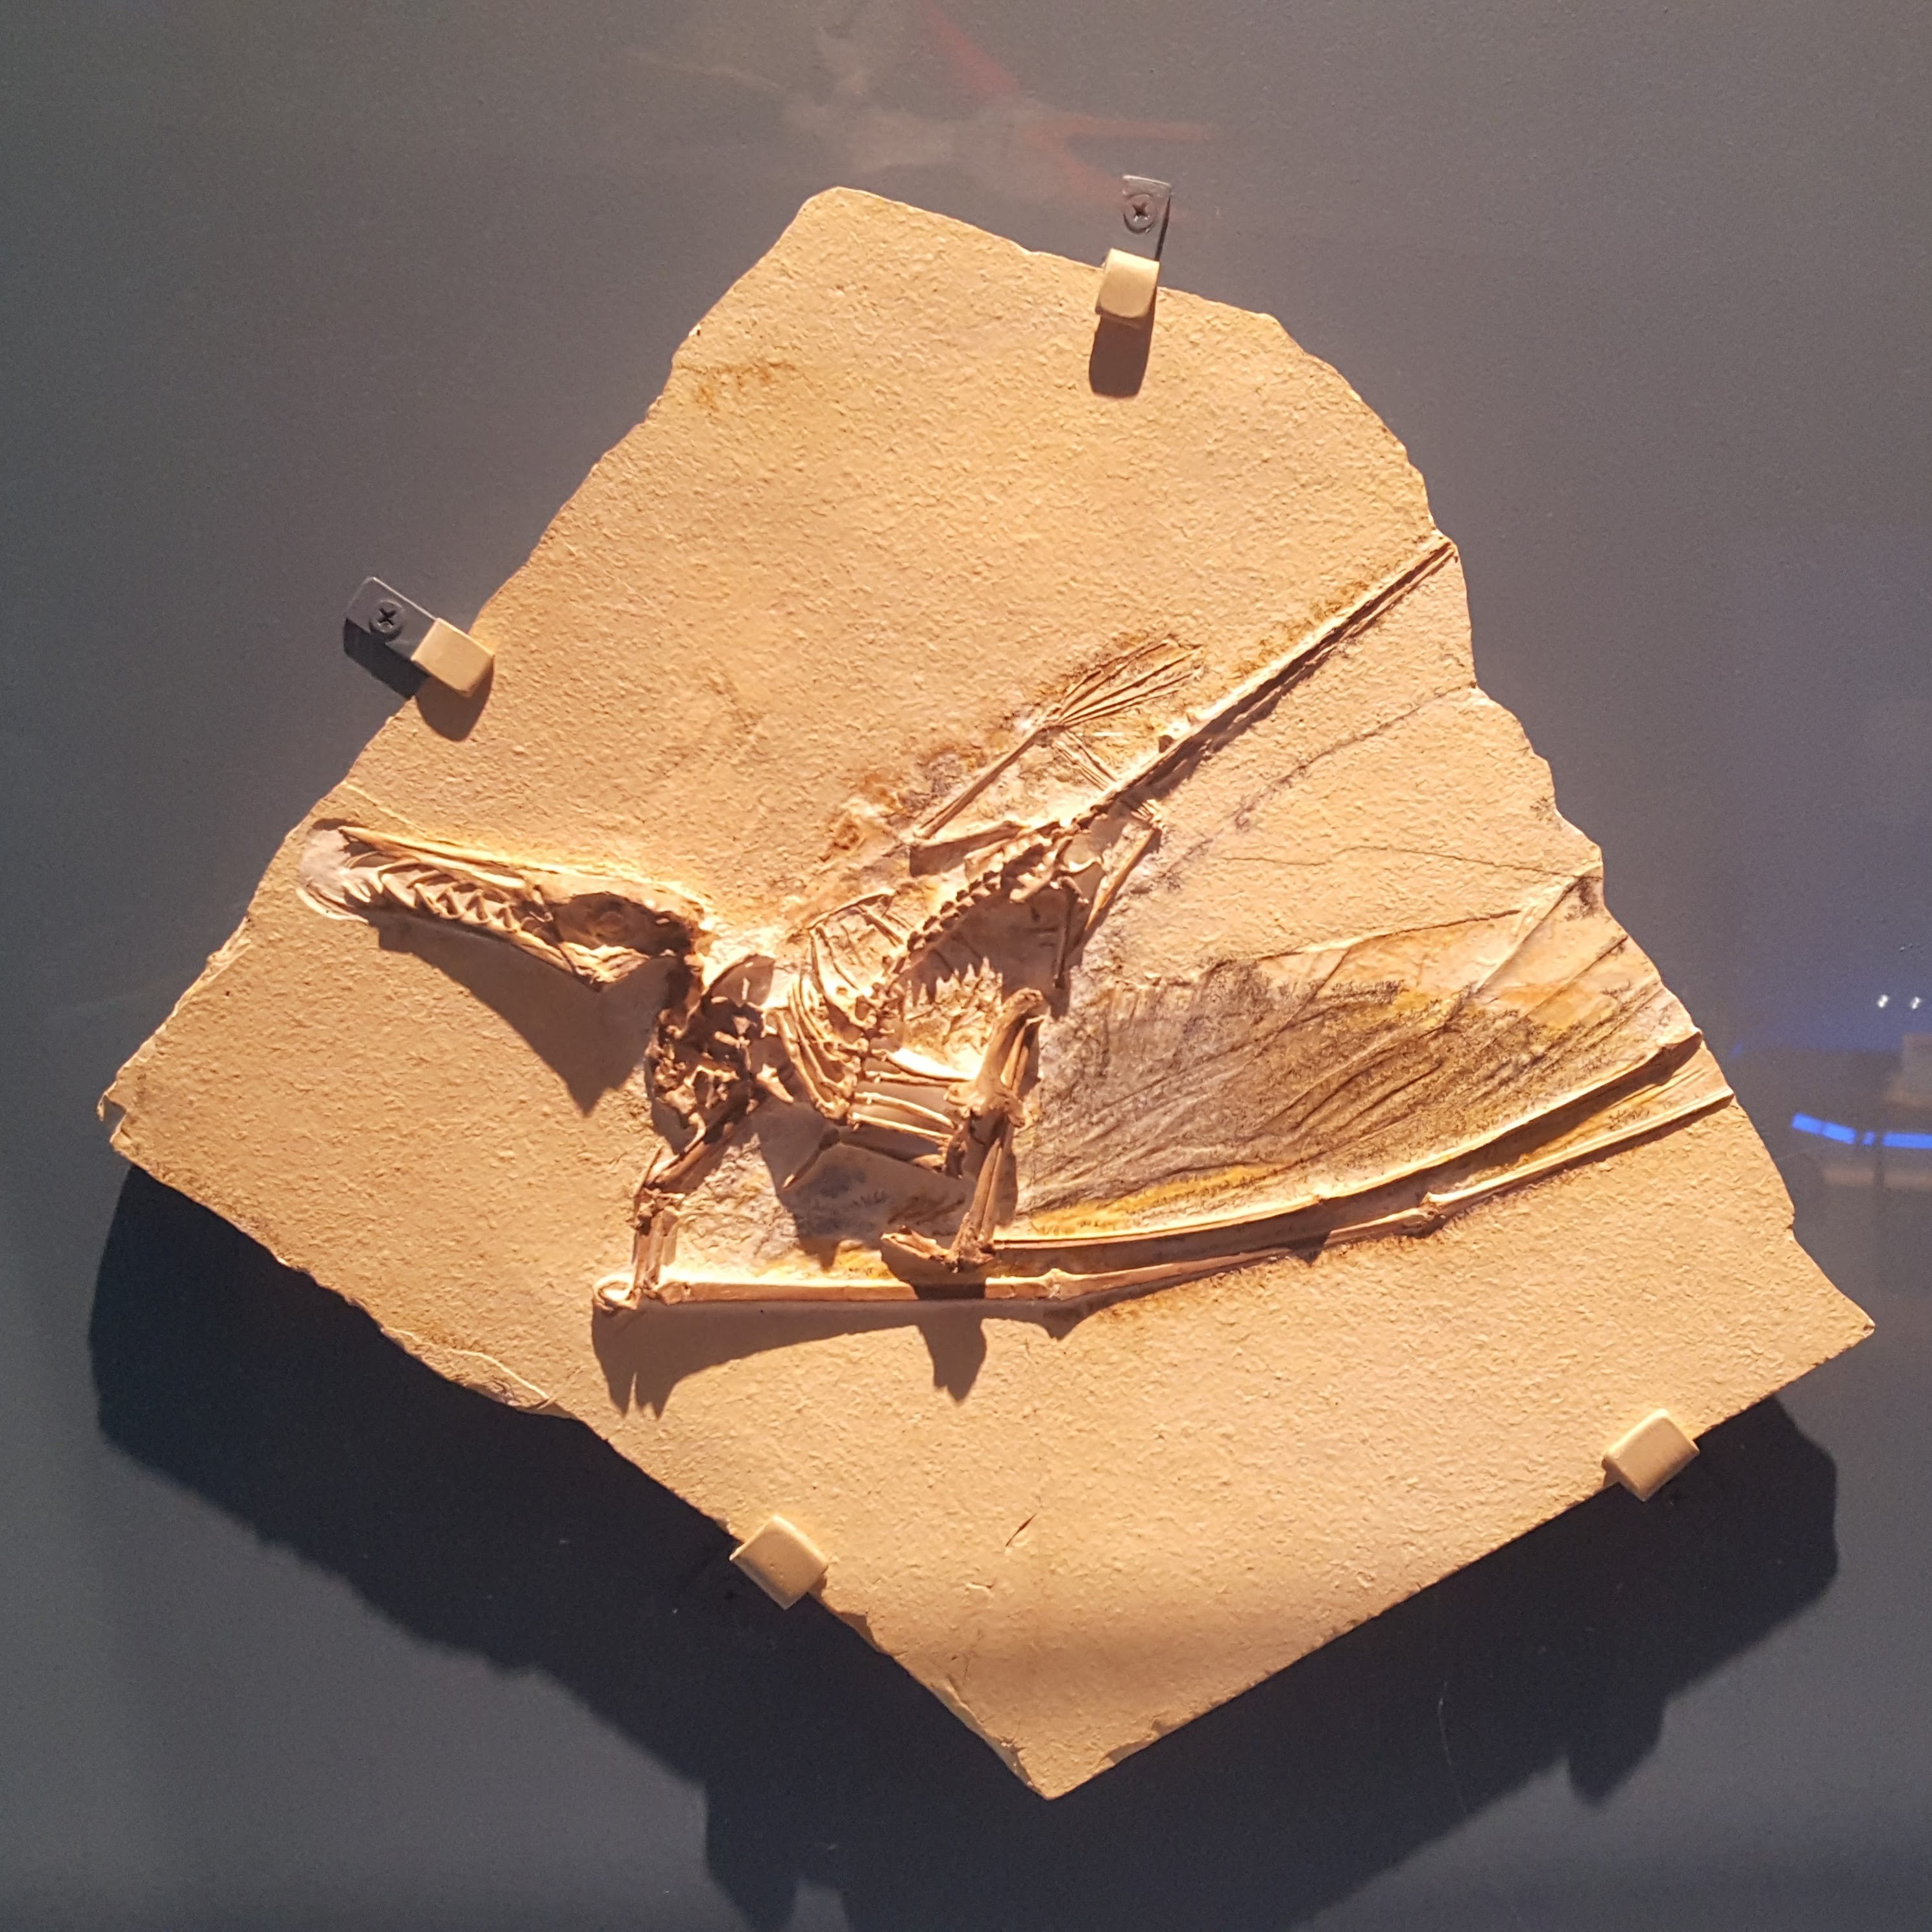 New Pterosaur exhibit brings world-class fossils, casts to Pittsburgh |  Blogh